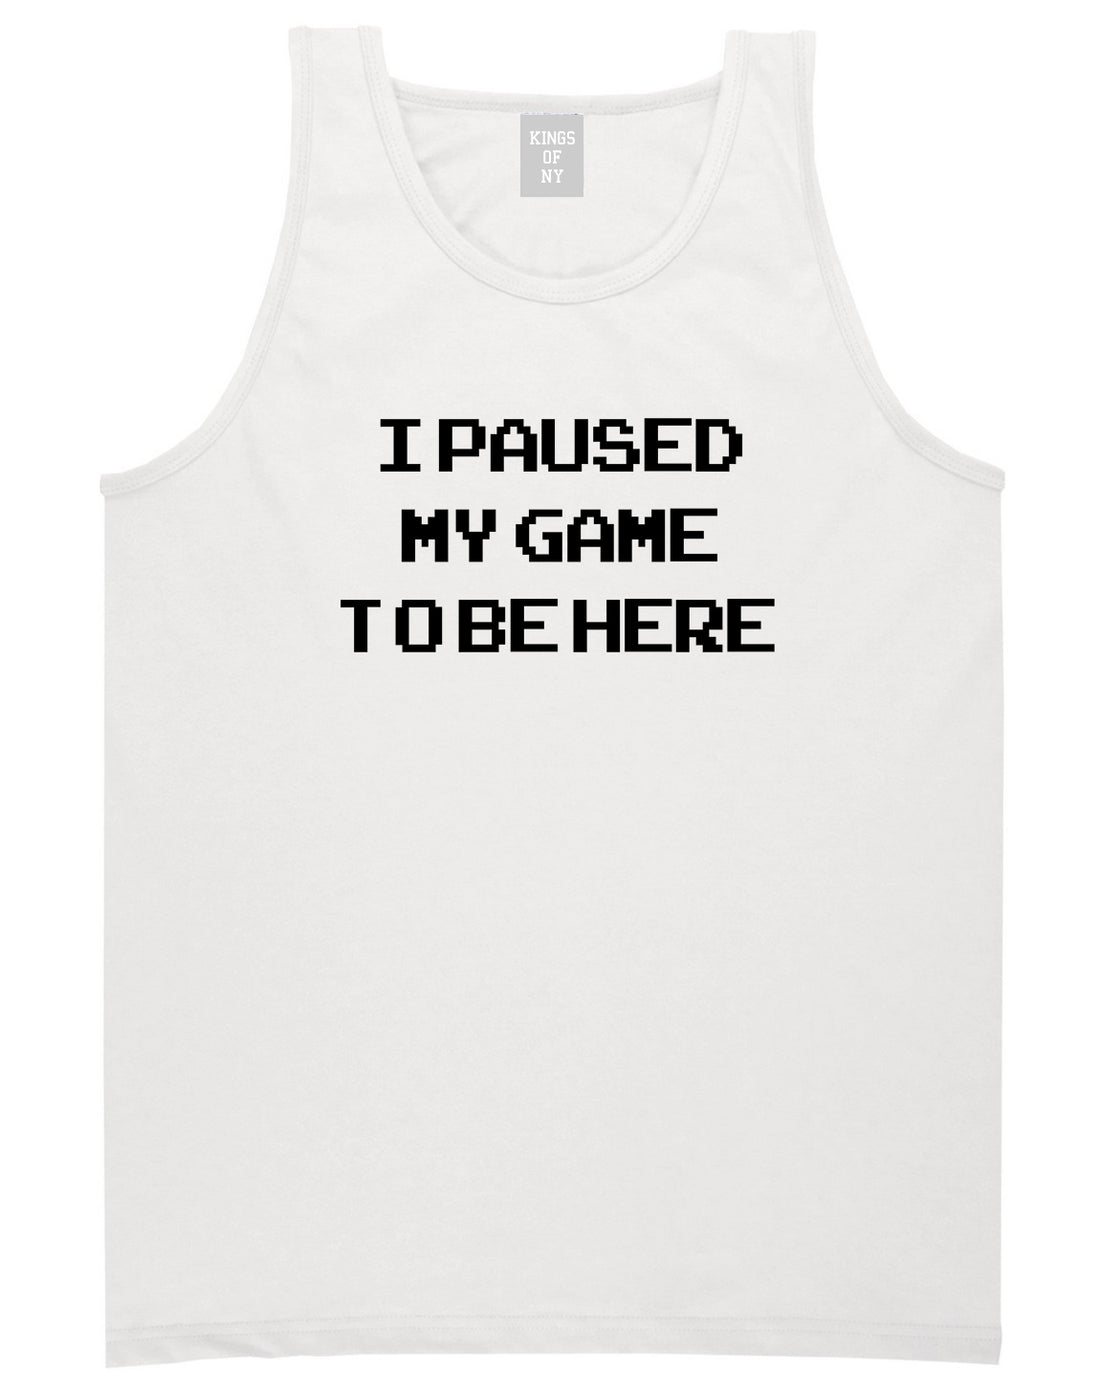 I Paused My Game To Be Here Gamer Mens Tank Top Shirt White